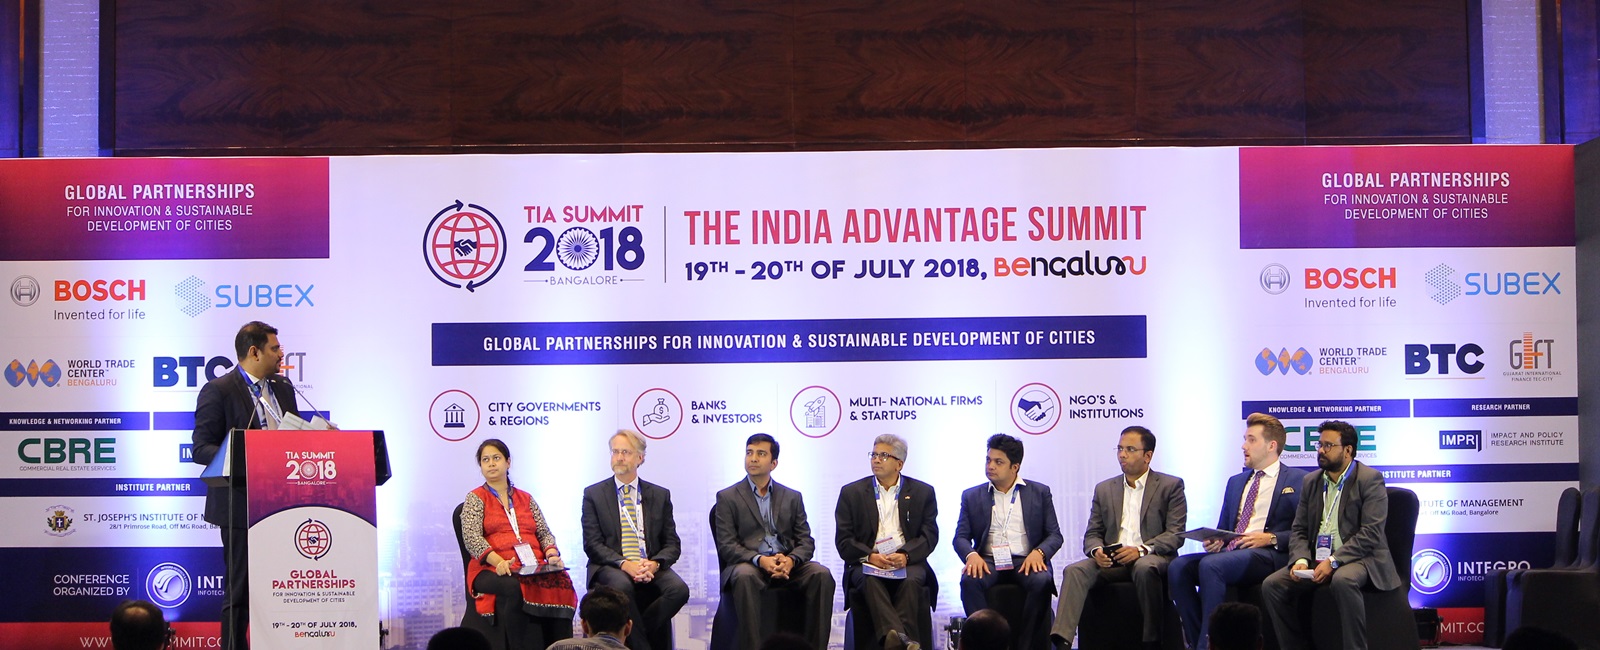 Thank you all for the overwhelming response  and making TIA Summit 2018 a Grand Success..!!